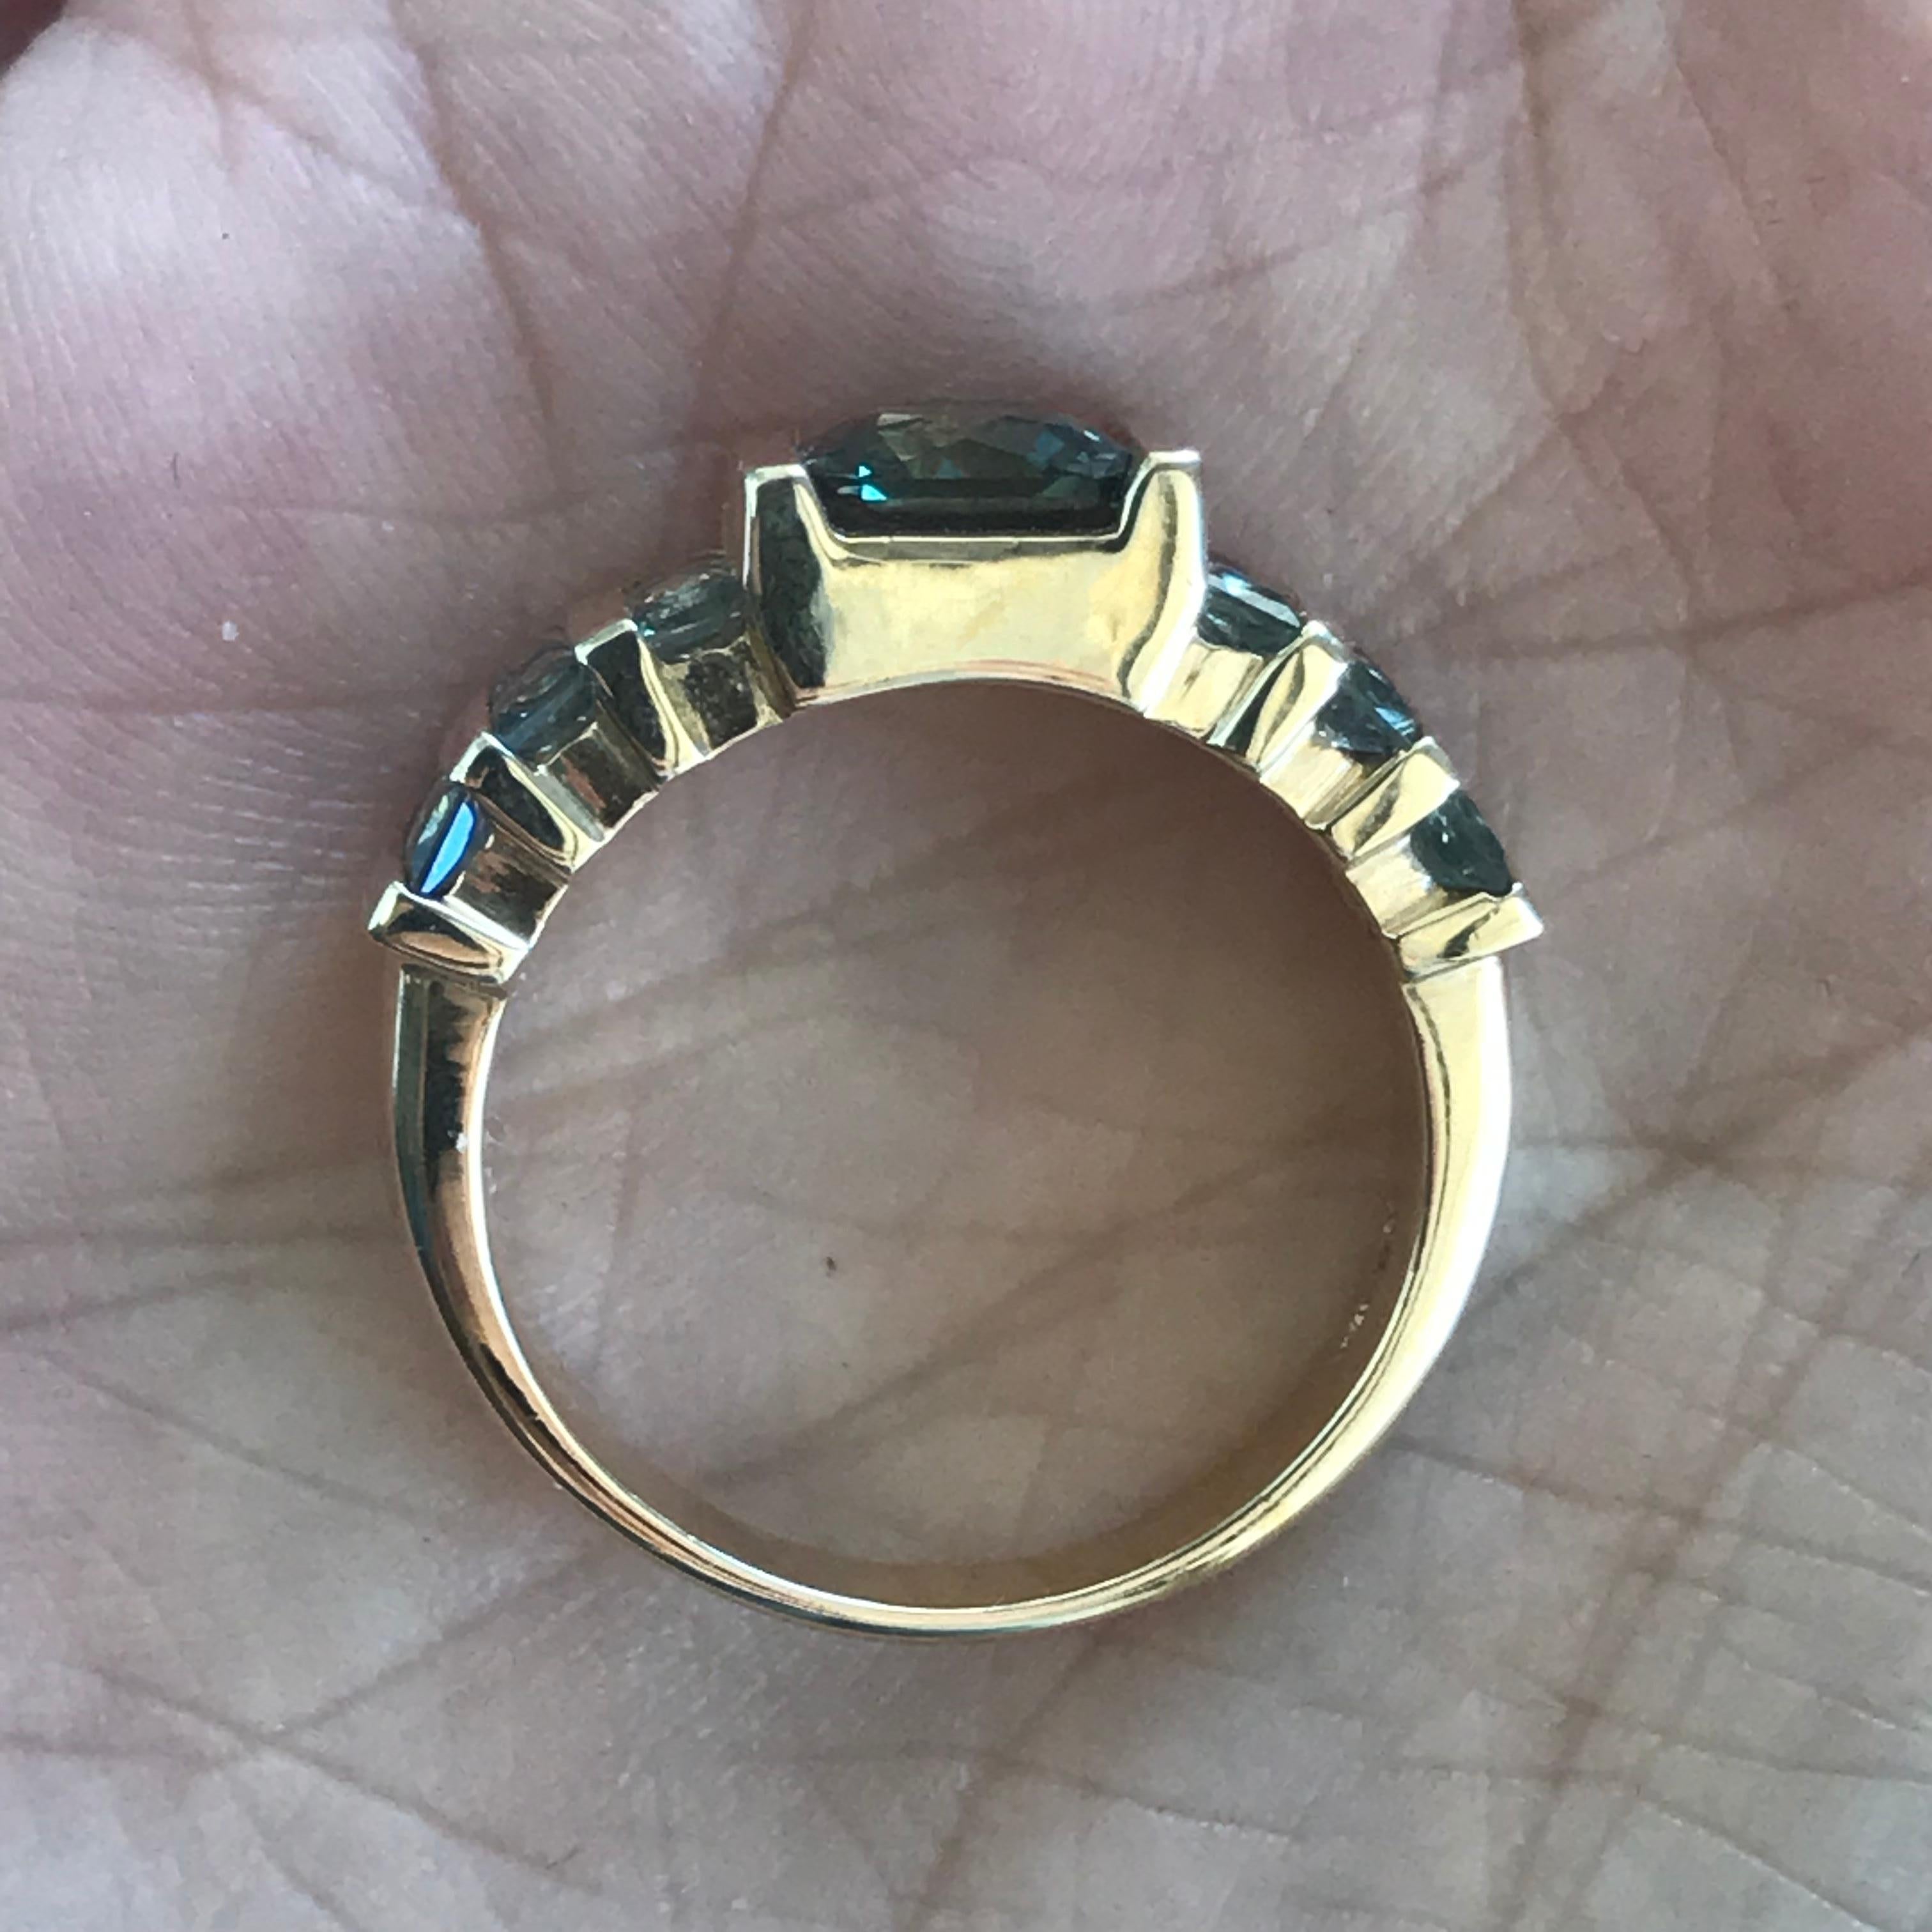 M4300-13

Can be sized to any finger size, this ring is currently in stock but if sold the ring will be made to order and take approximately 1-3 weeks from customers final design approval. If you need a sooner date let us know and we will see if we